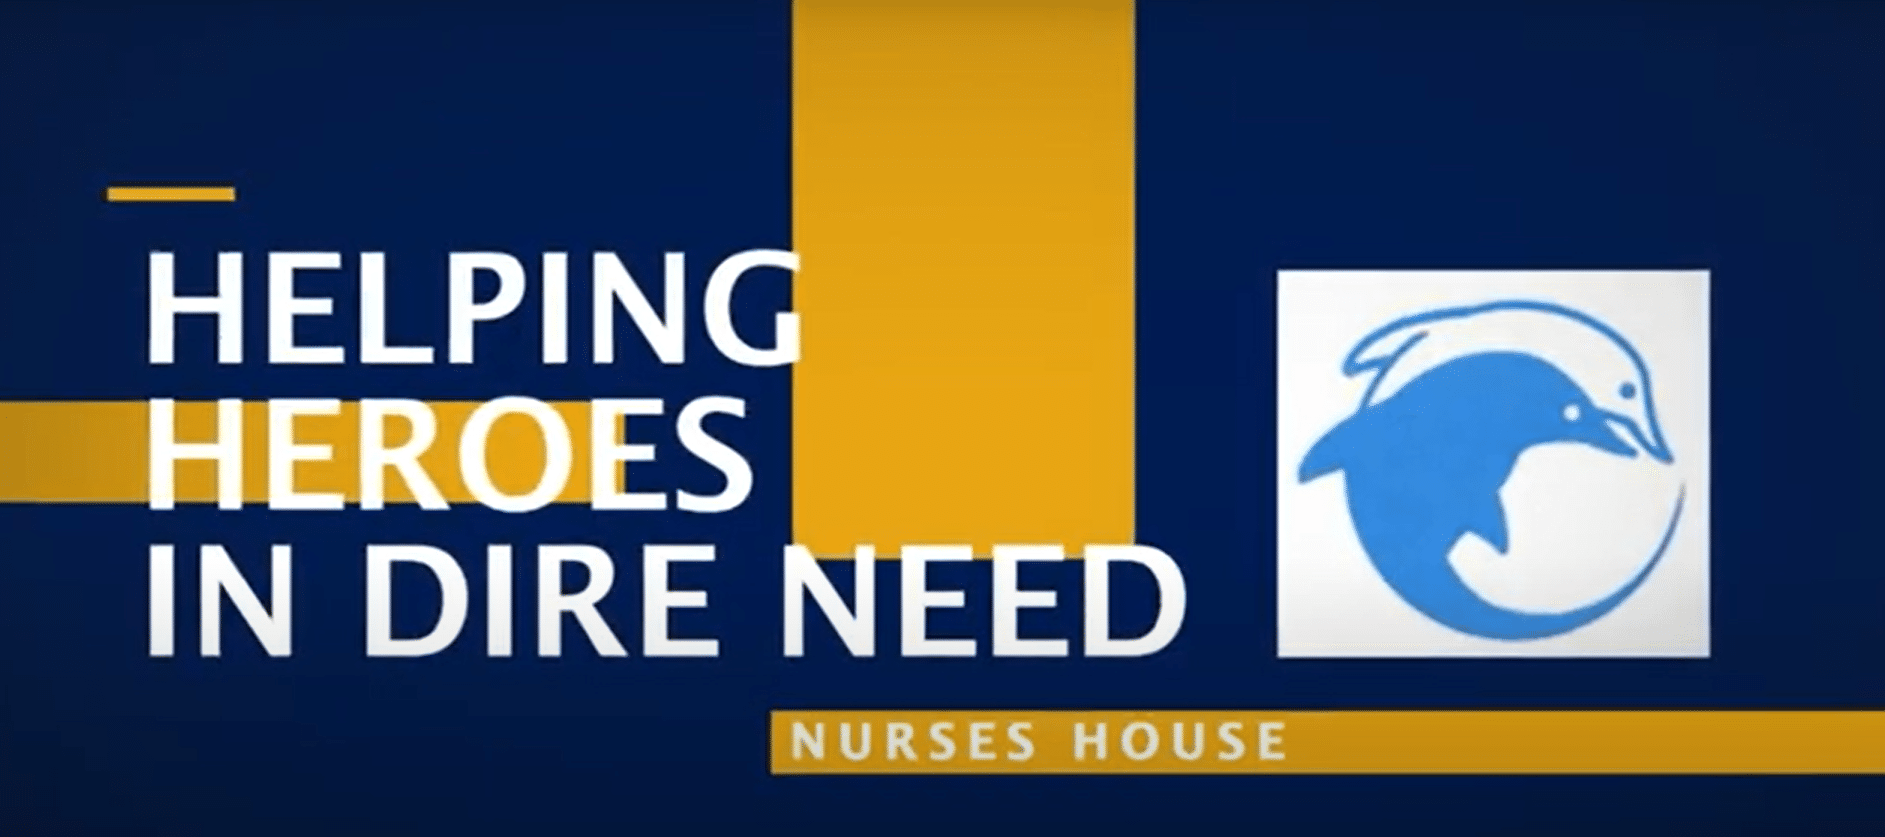 a blue and yellow rectangular pattern background with the words Helping Heroes in Dire Need: Nurses House and the Nurses House logo